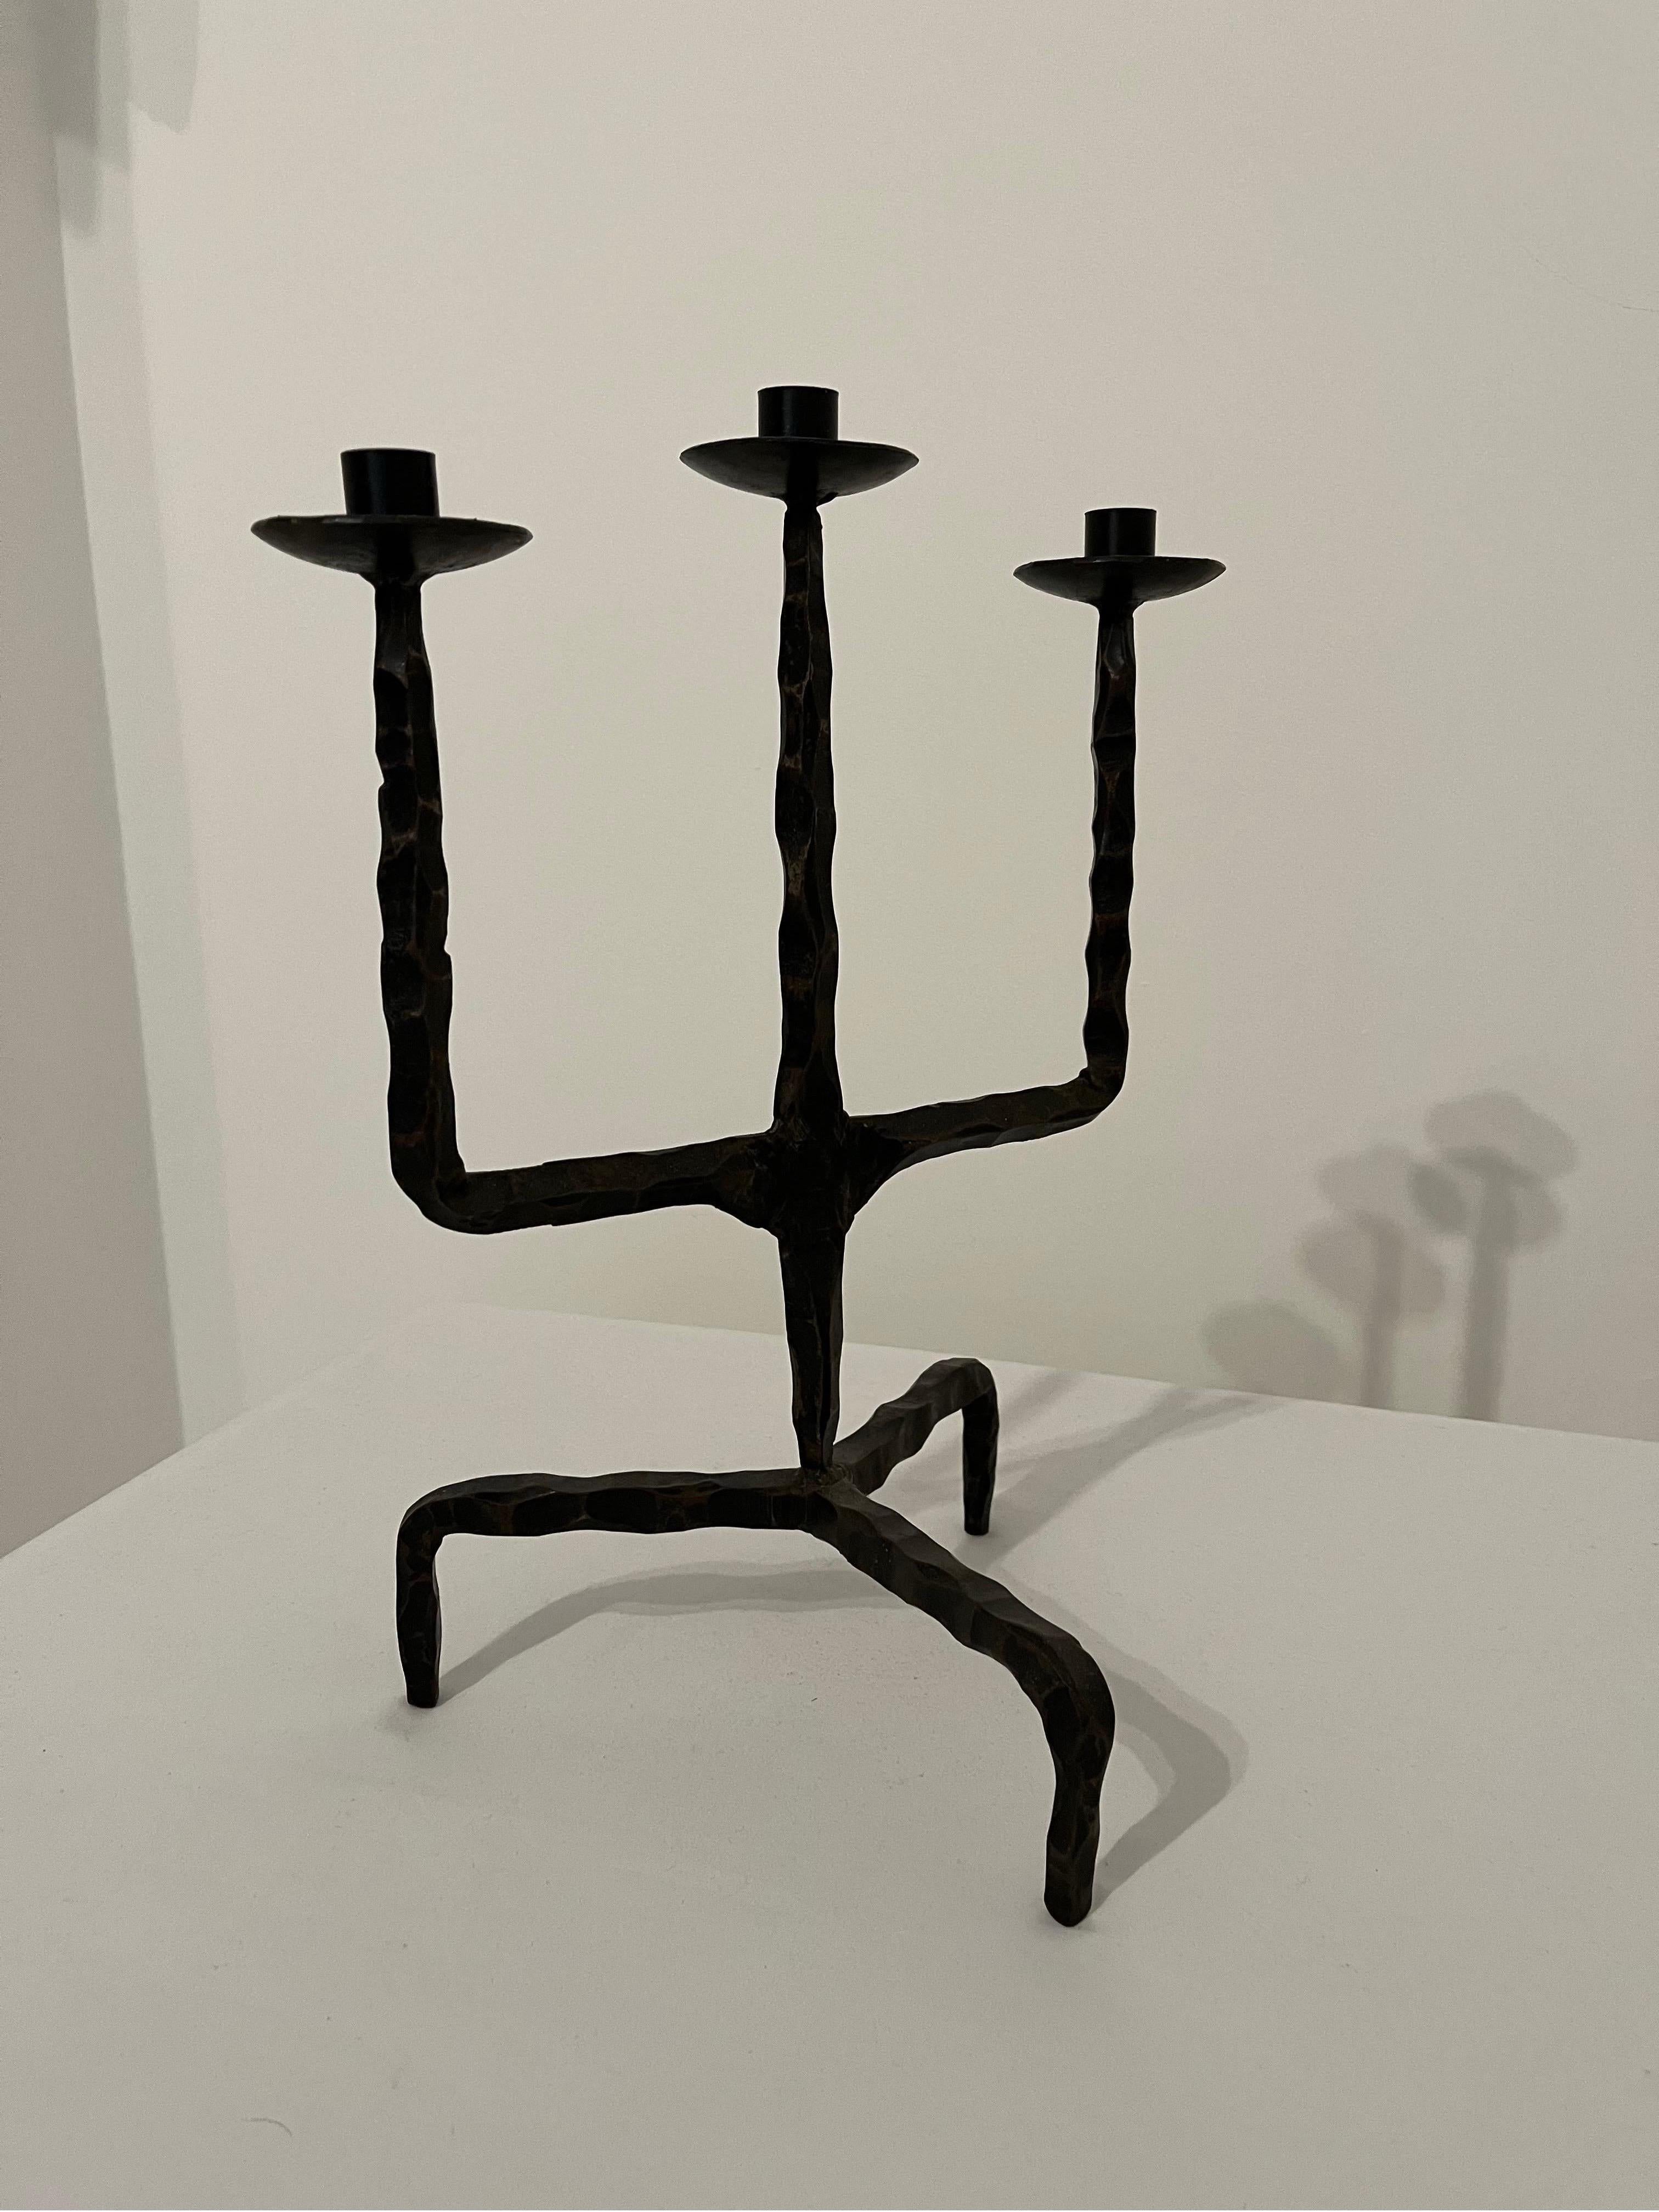 Forged Brutalist French Iron candelabra candlestick - after Marolles c1950s For Sale